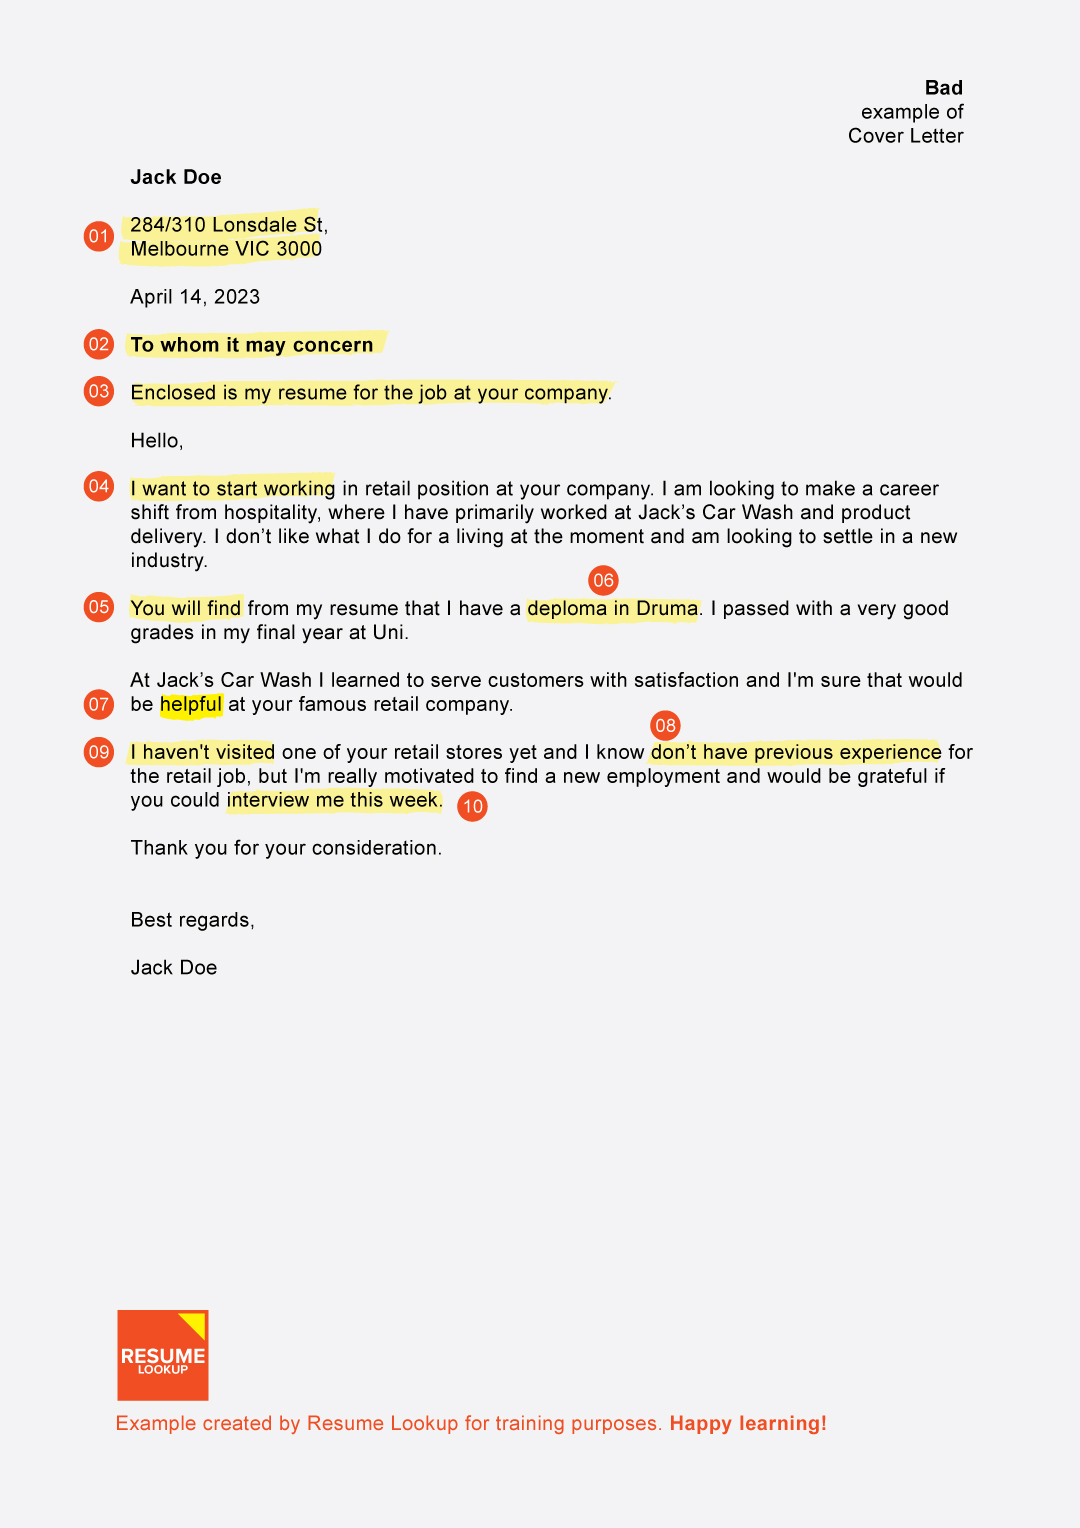 Bad-Cover-Letter-Example-Resume-Research-01-Landing